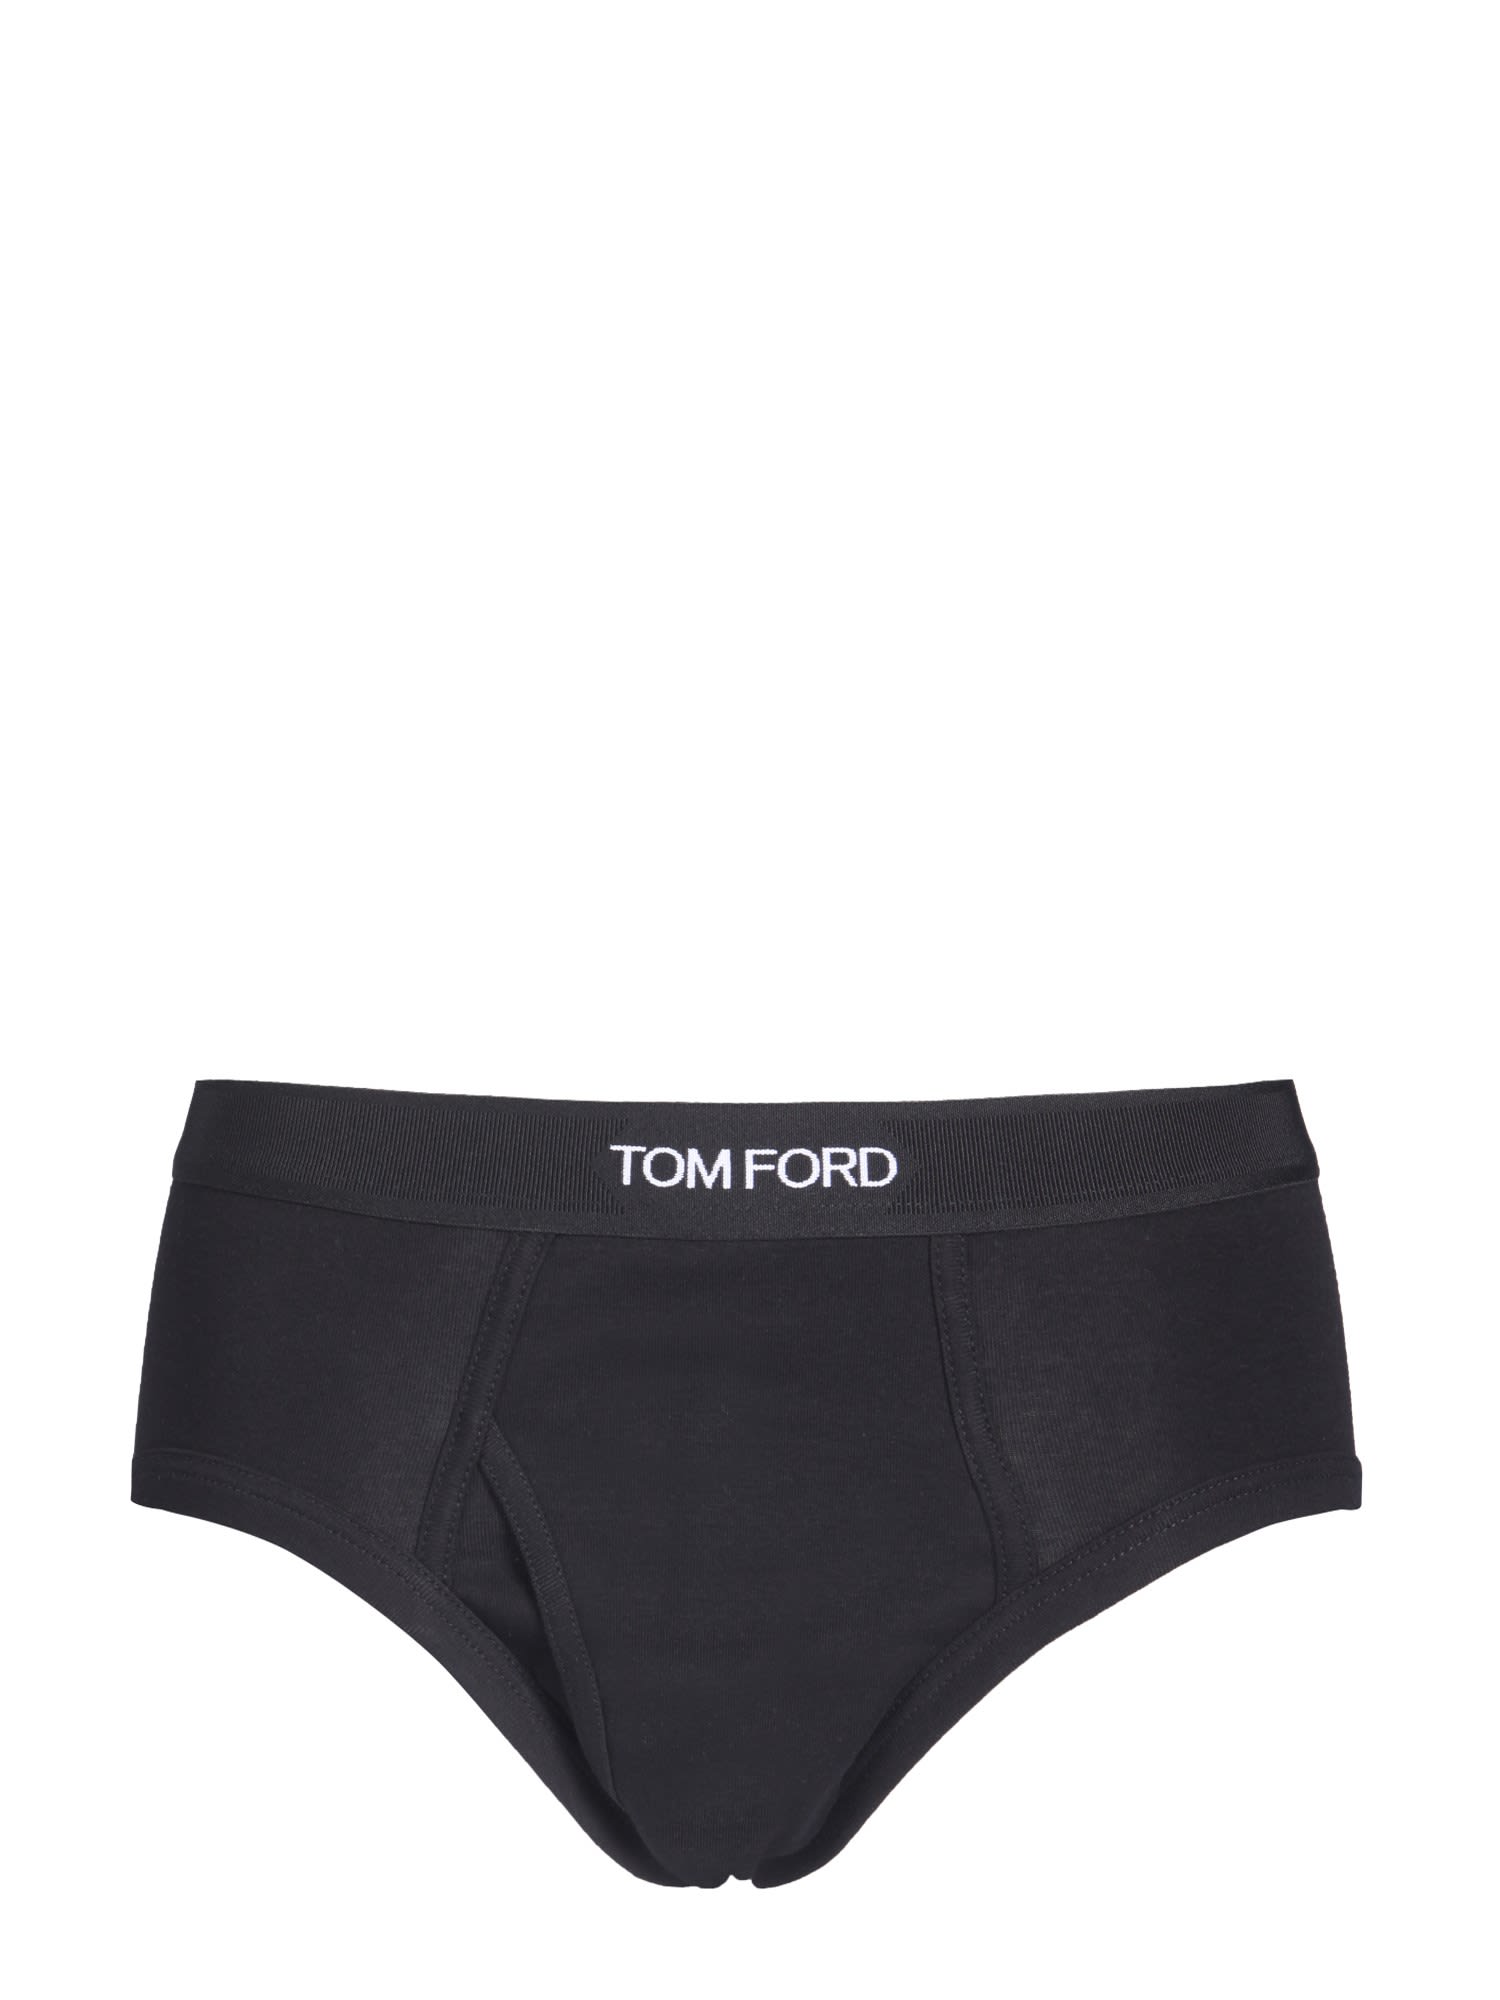 Tom Ford Briefs With Logoed Band